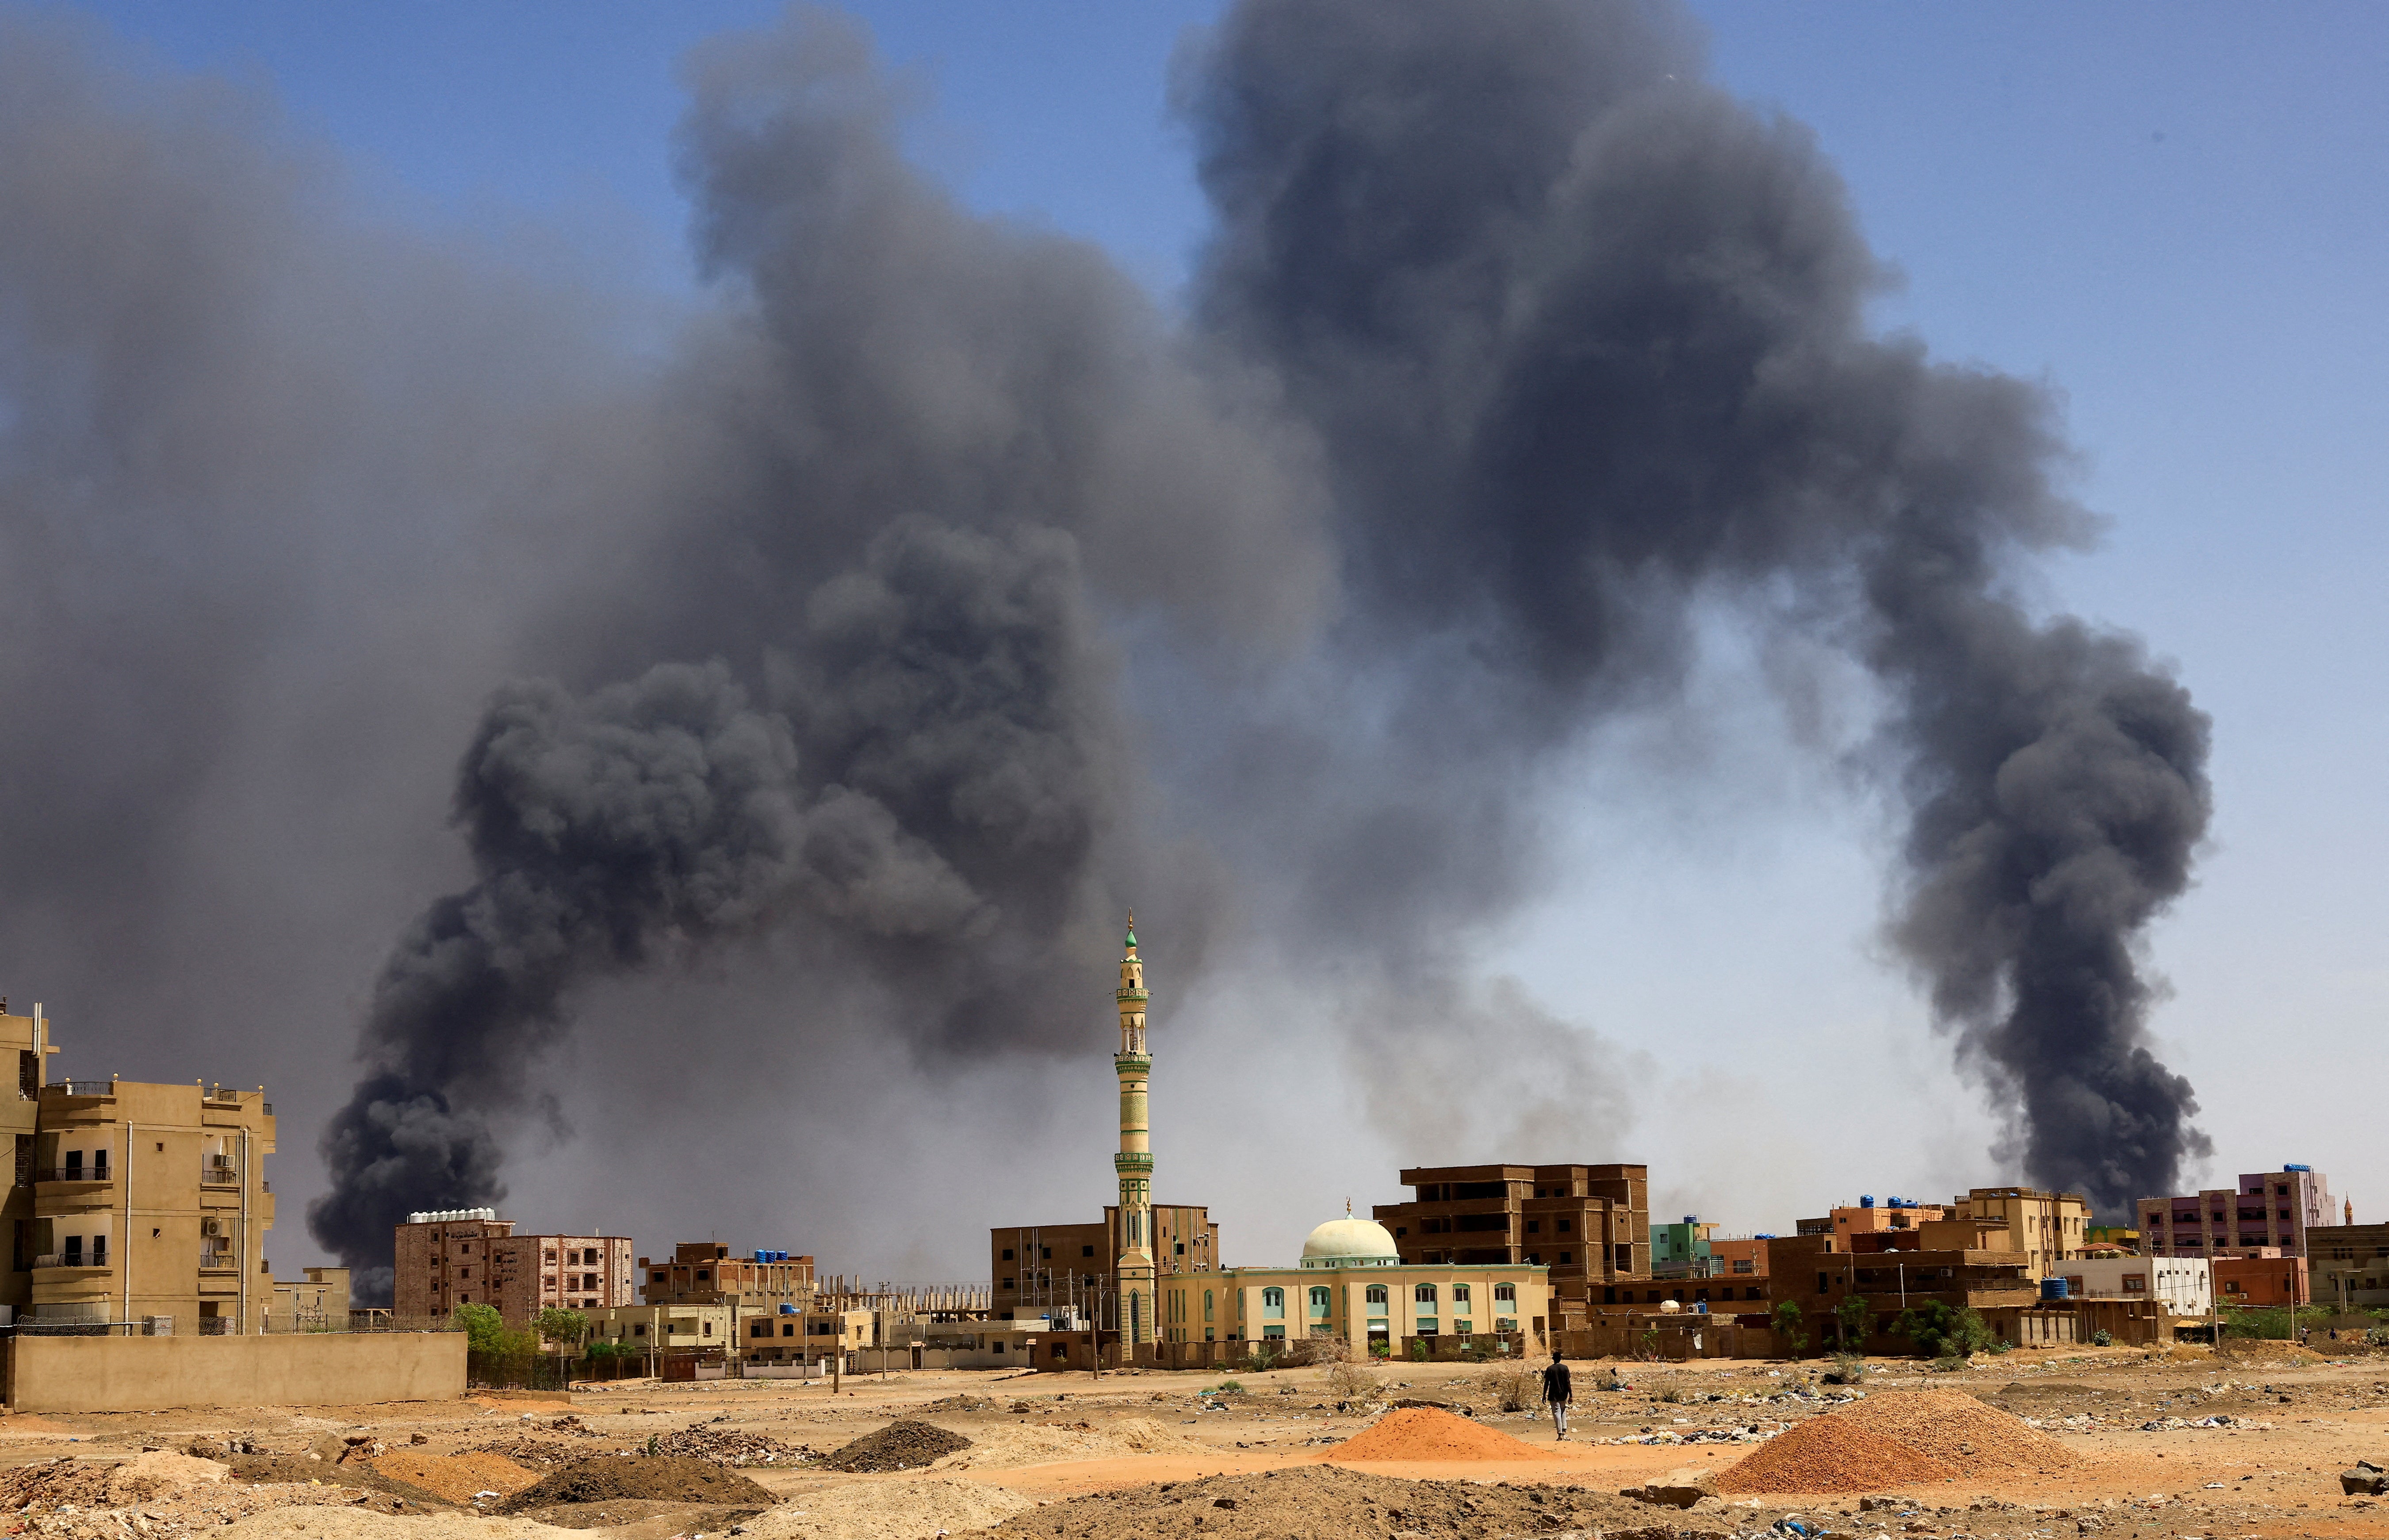 Smoke rises above buildings after aerial bombardment during clashes